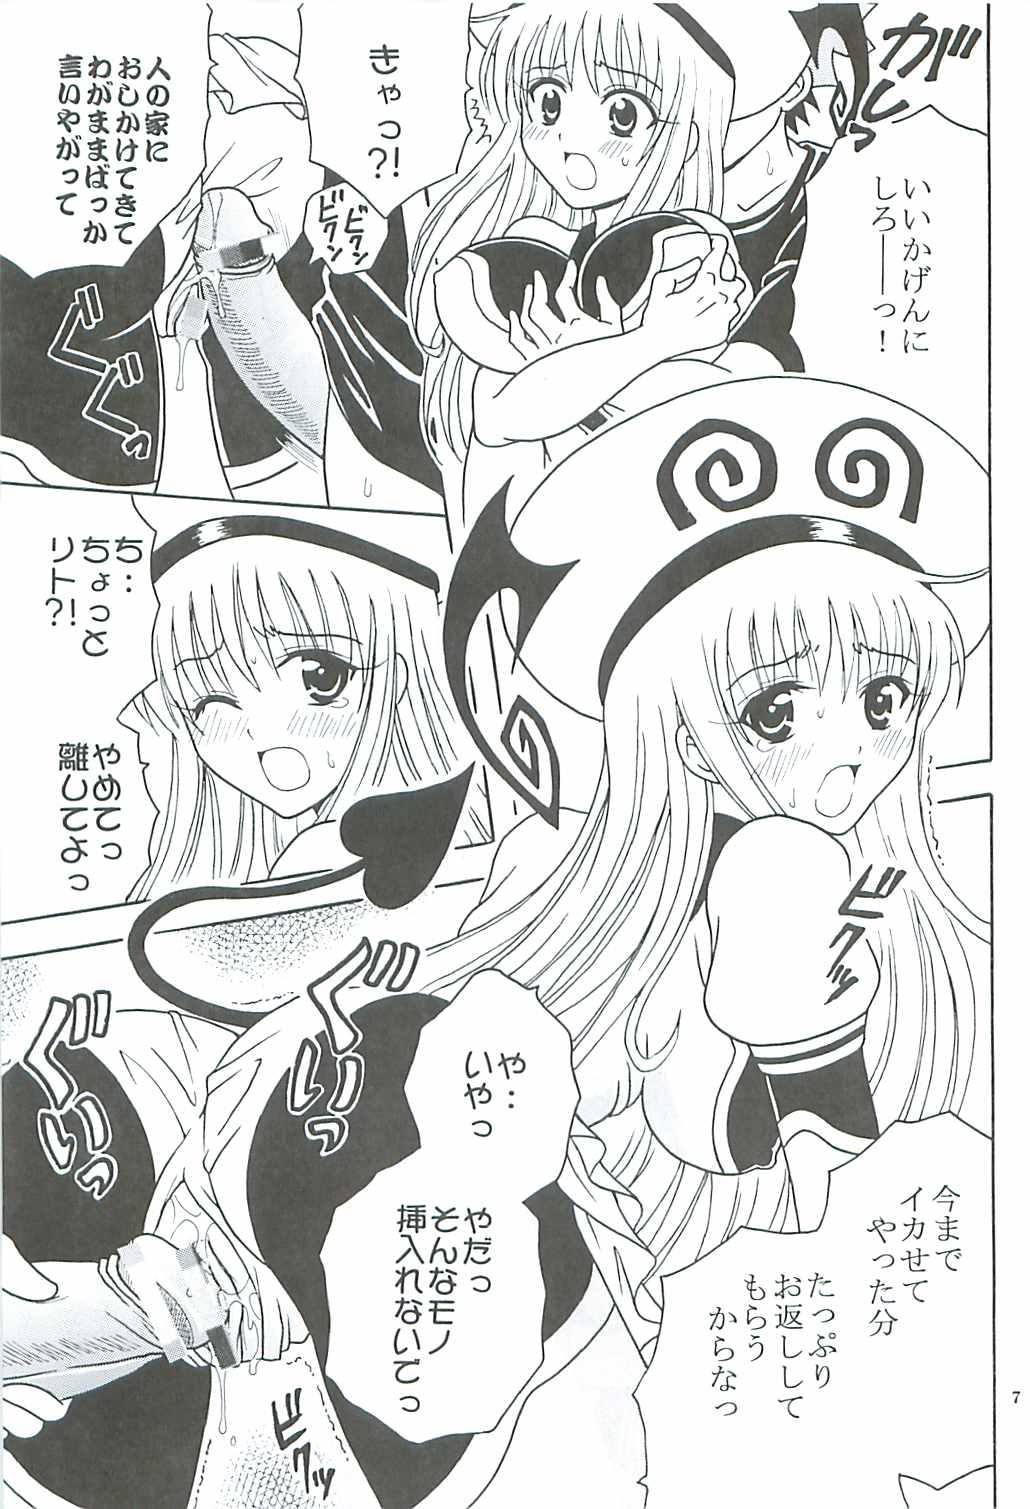 [St.Rio] ToLOVE Ryu 2 (To Love Ru) page 8 full